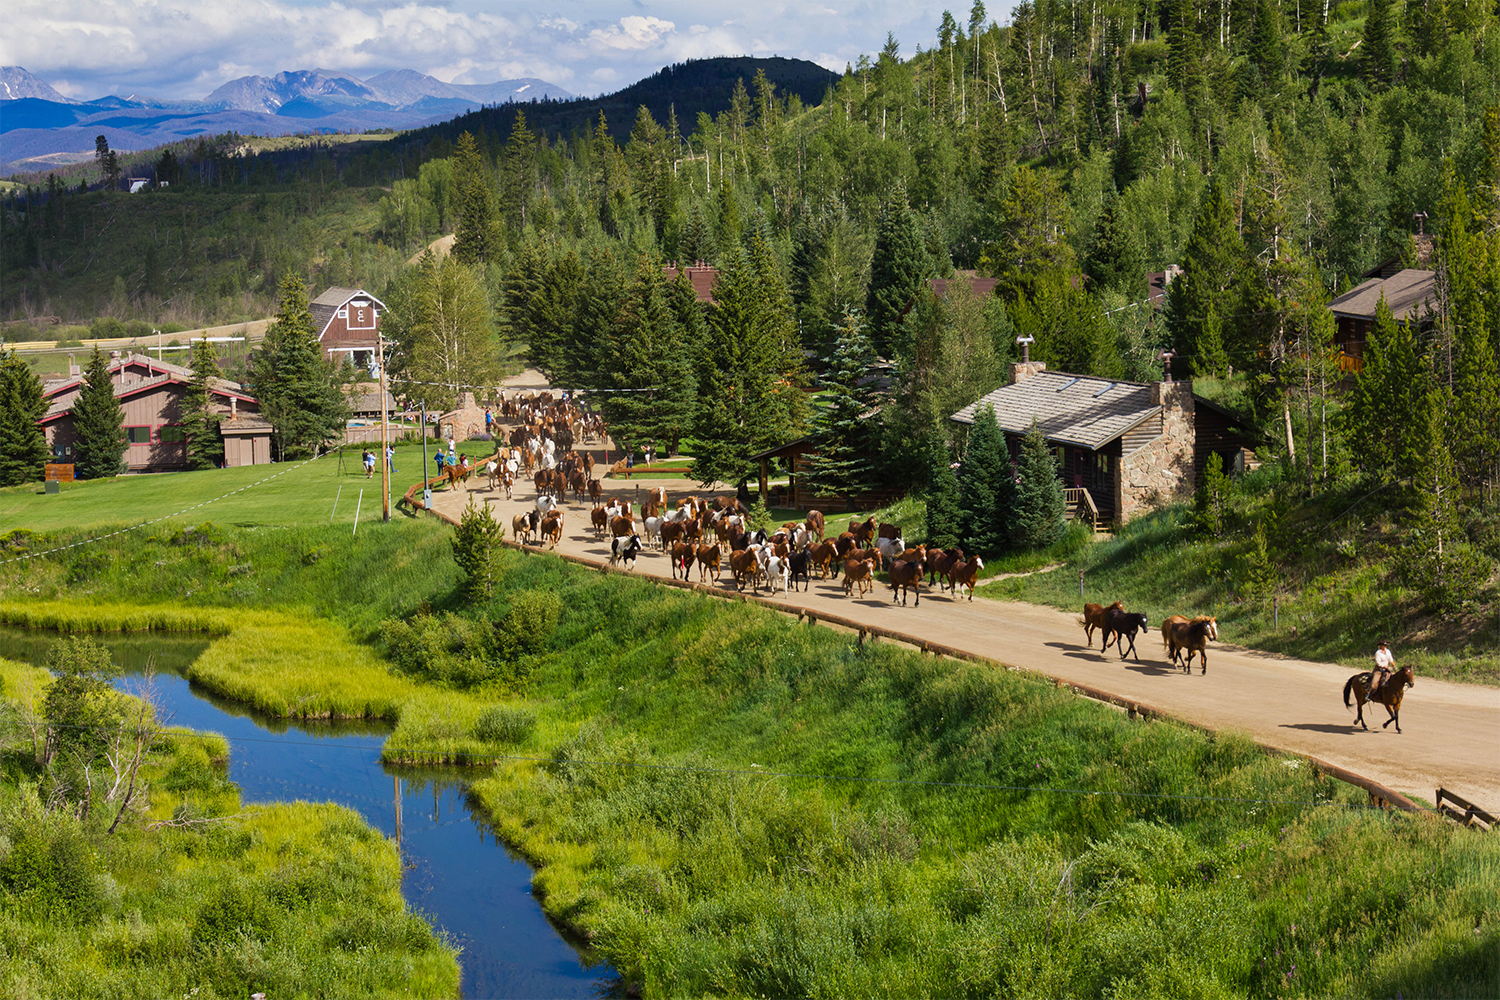 Dozens of horses and riders at C Lazy U Ranch in Colorado, one of the best luxury ranch resorts in the U.S.